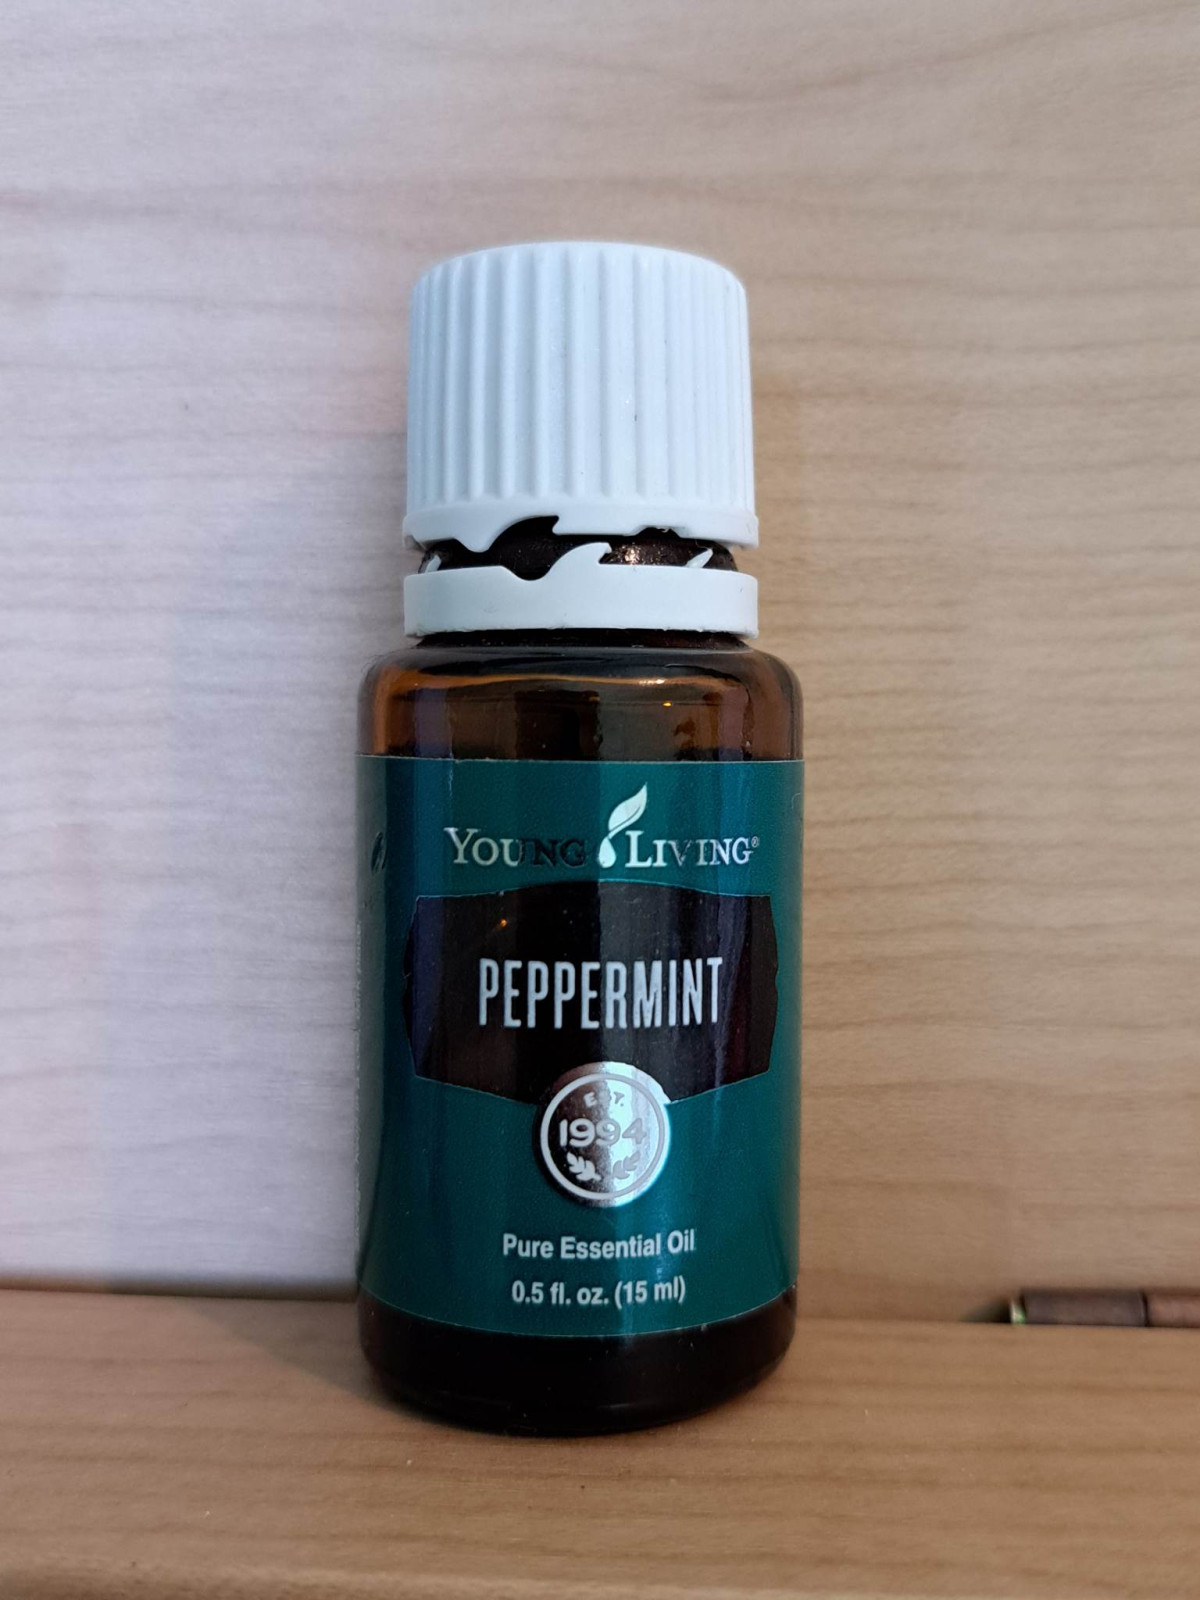 Products That Have Our Loyalty: Peppermint Essential Oil